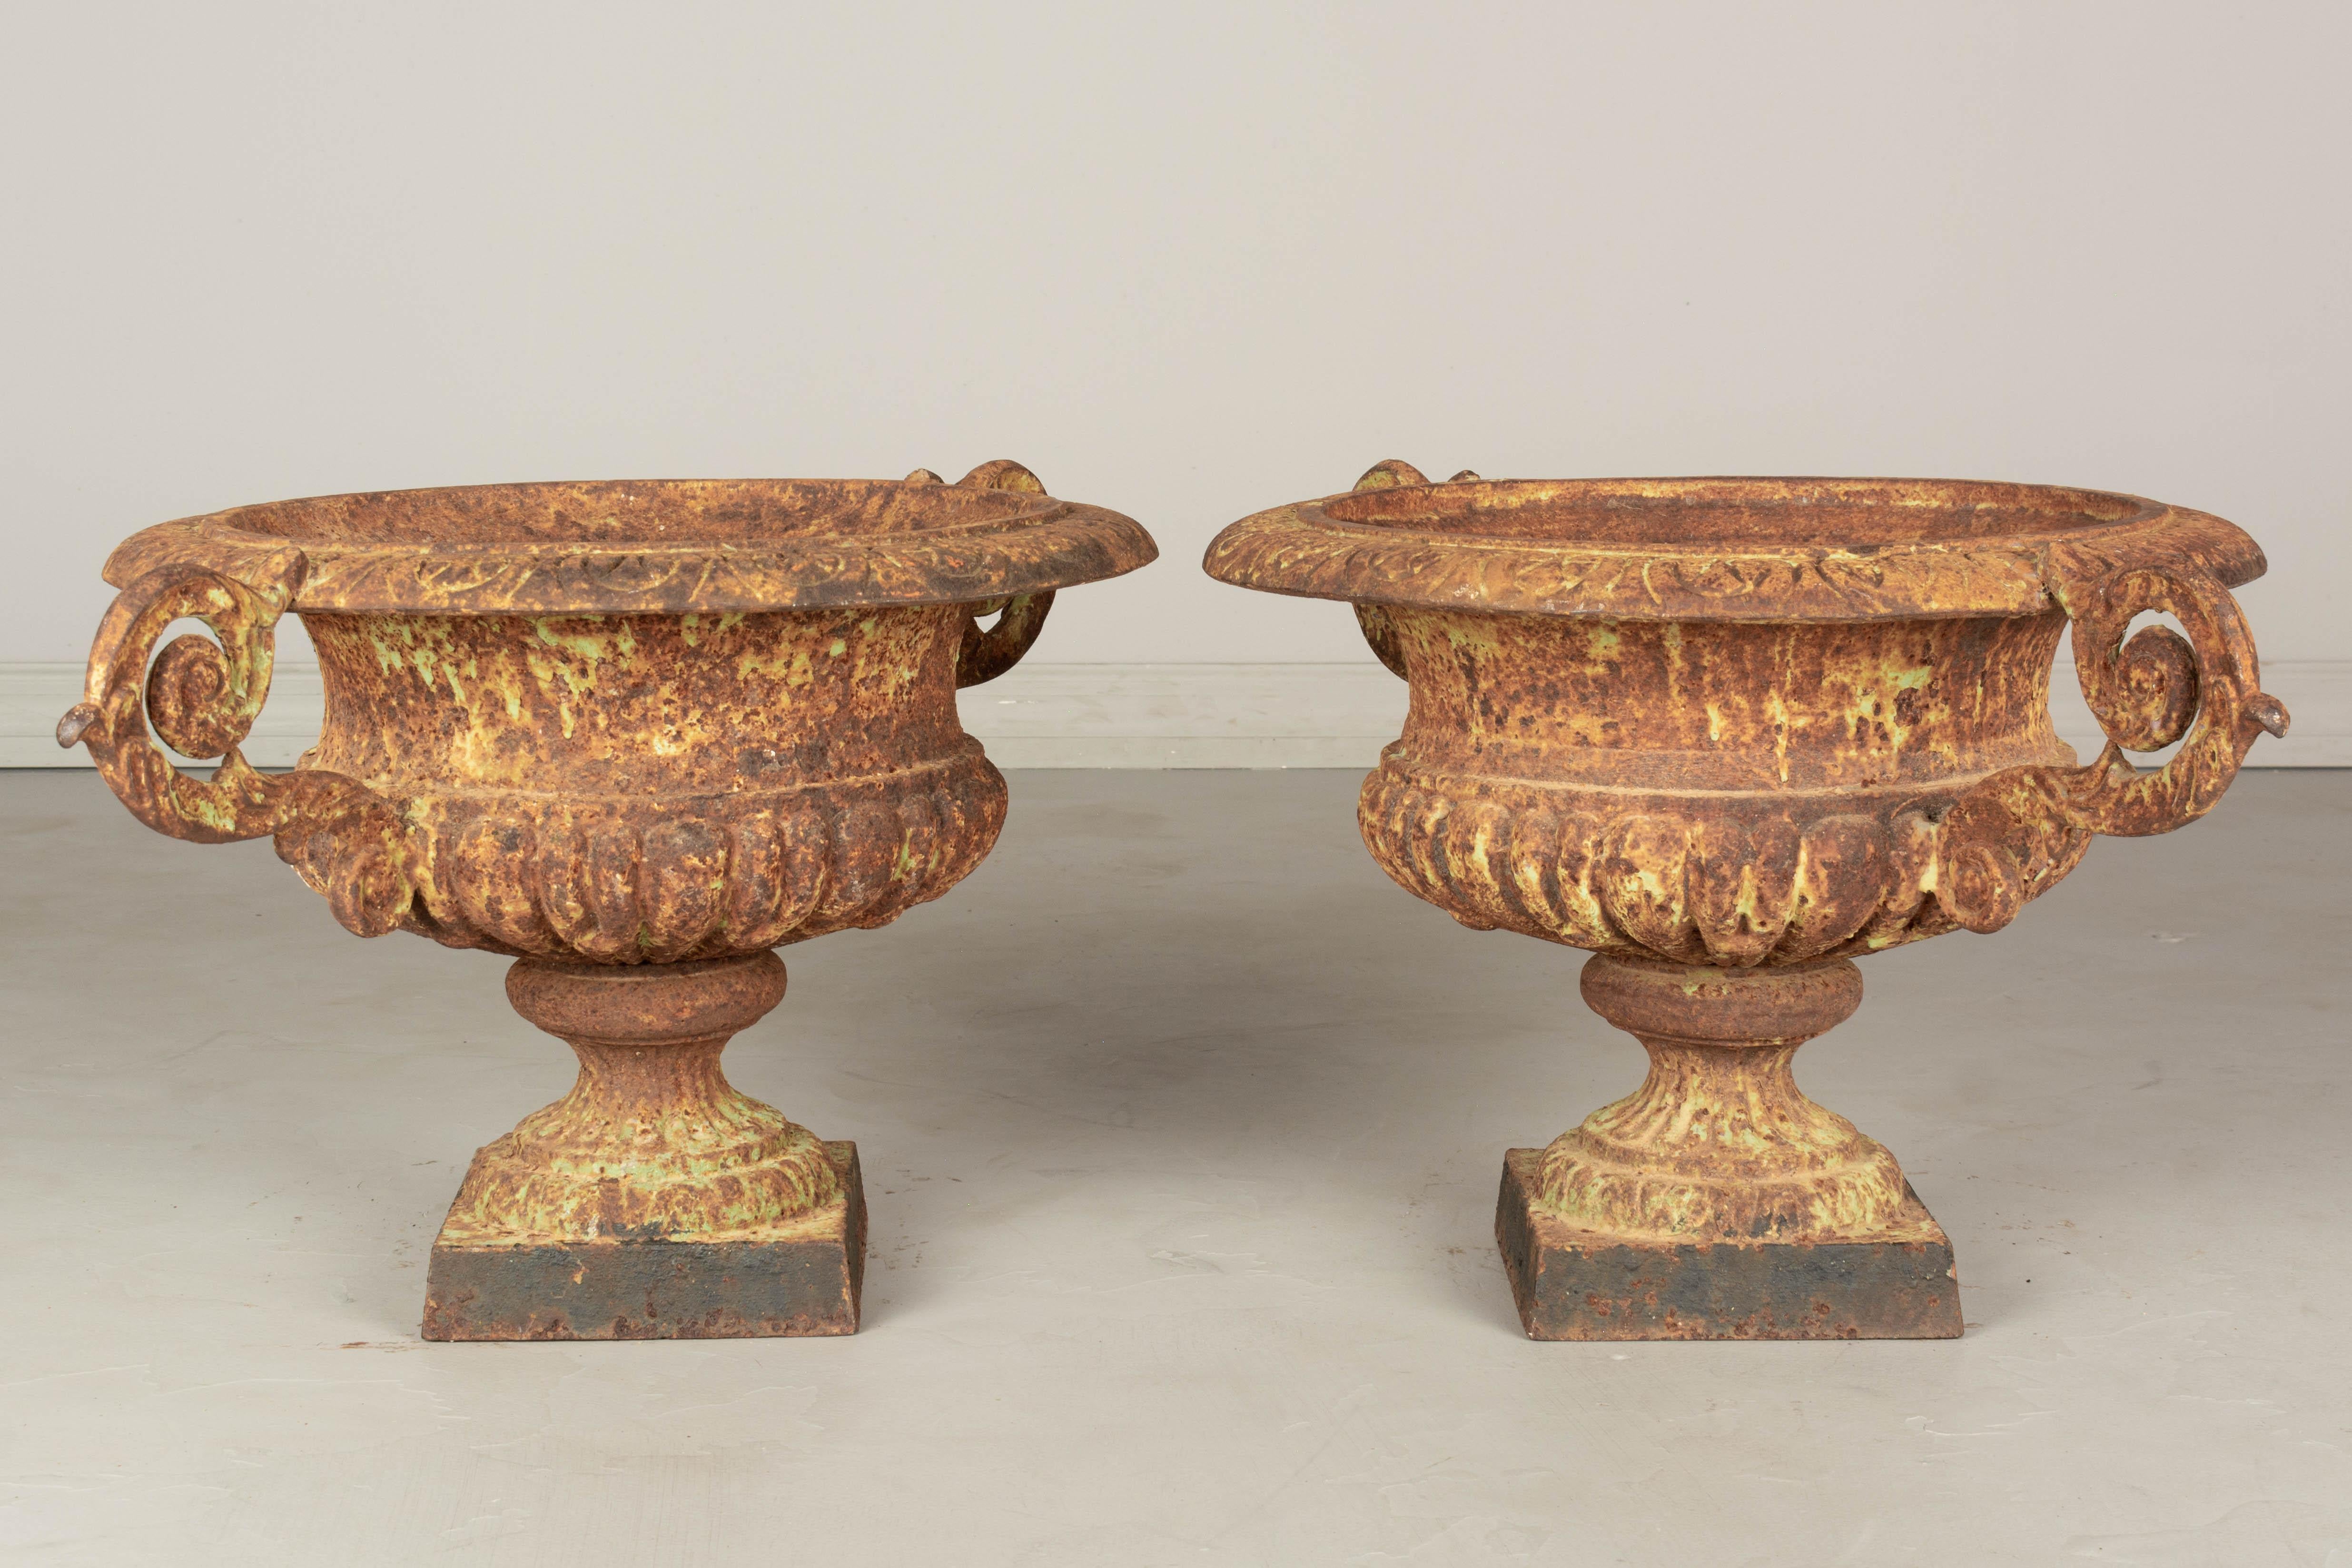 Pair of 19th Century French Cast Iron Garden Urns For Sale 1